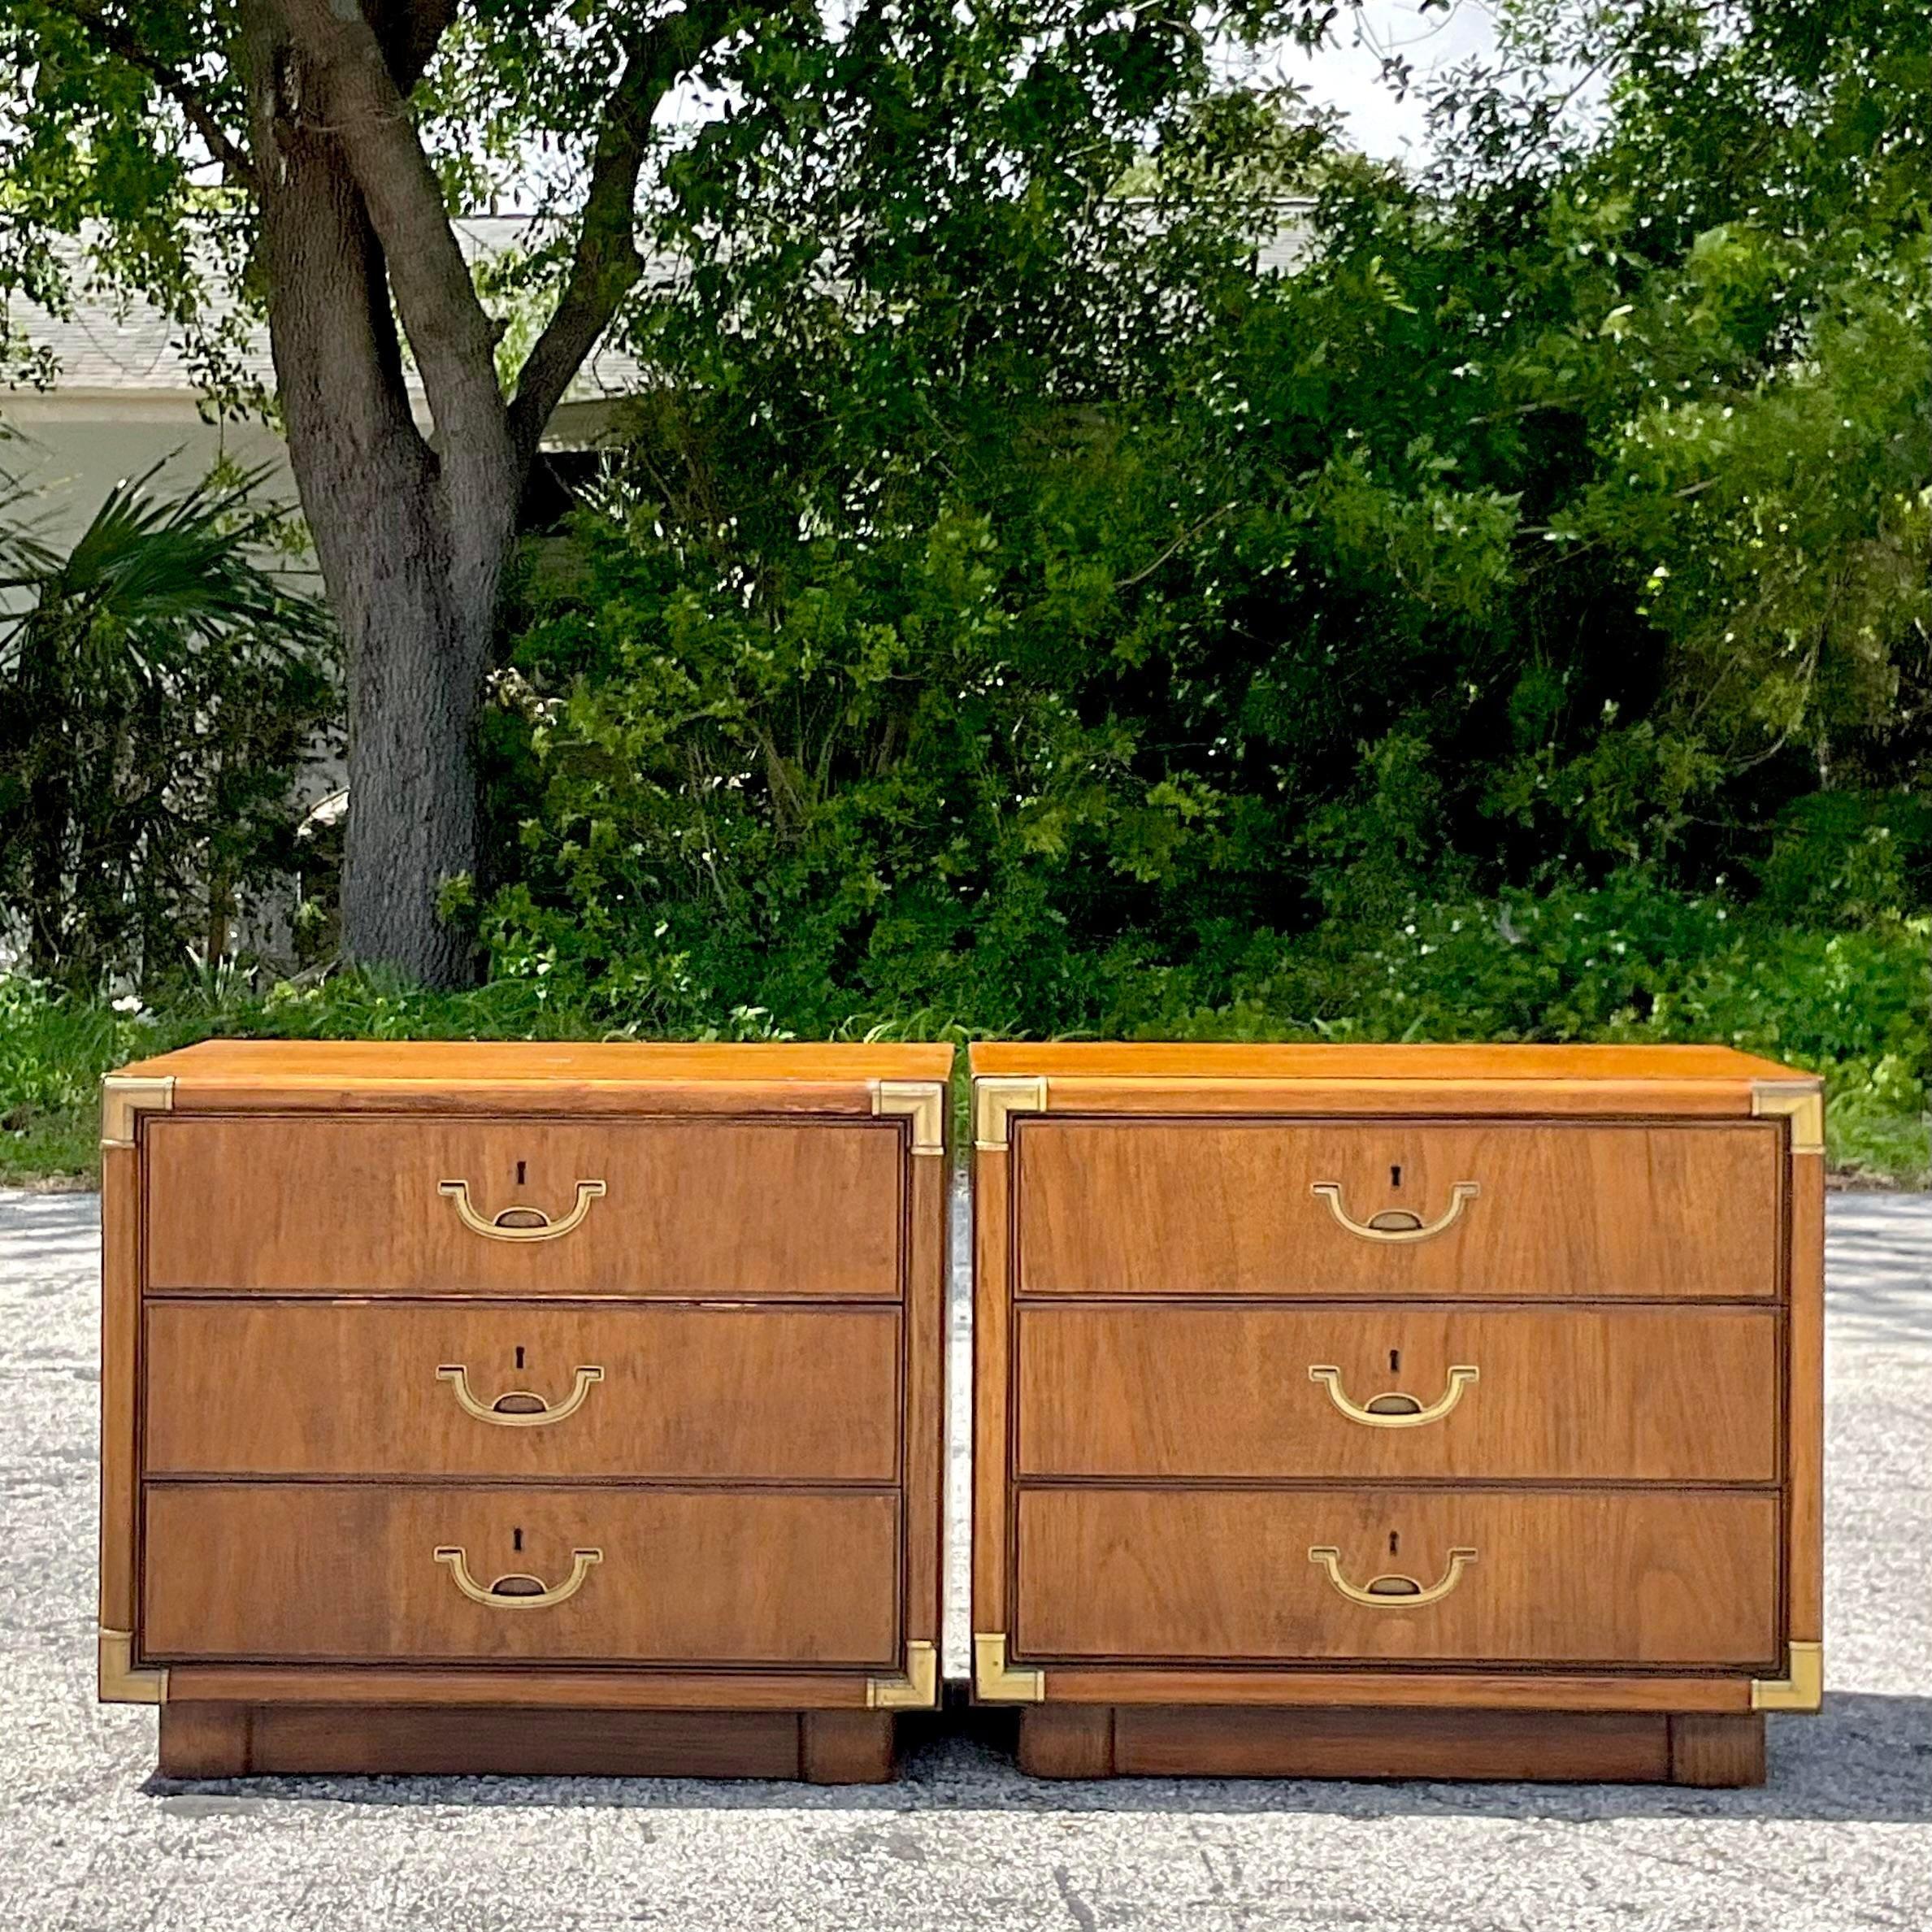 American 1980s Vintage Boho Drexel Campaign Nightstands - a Pair For Sale